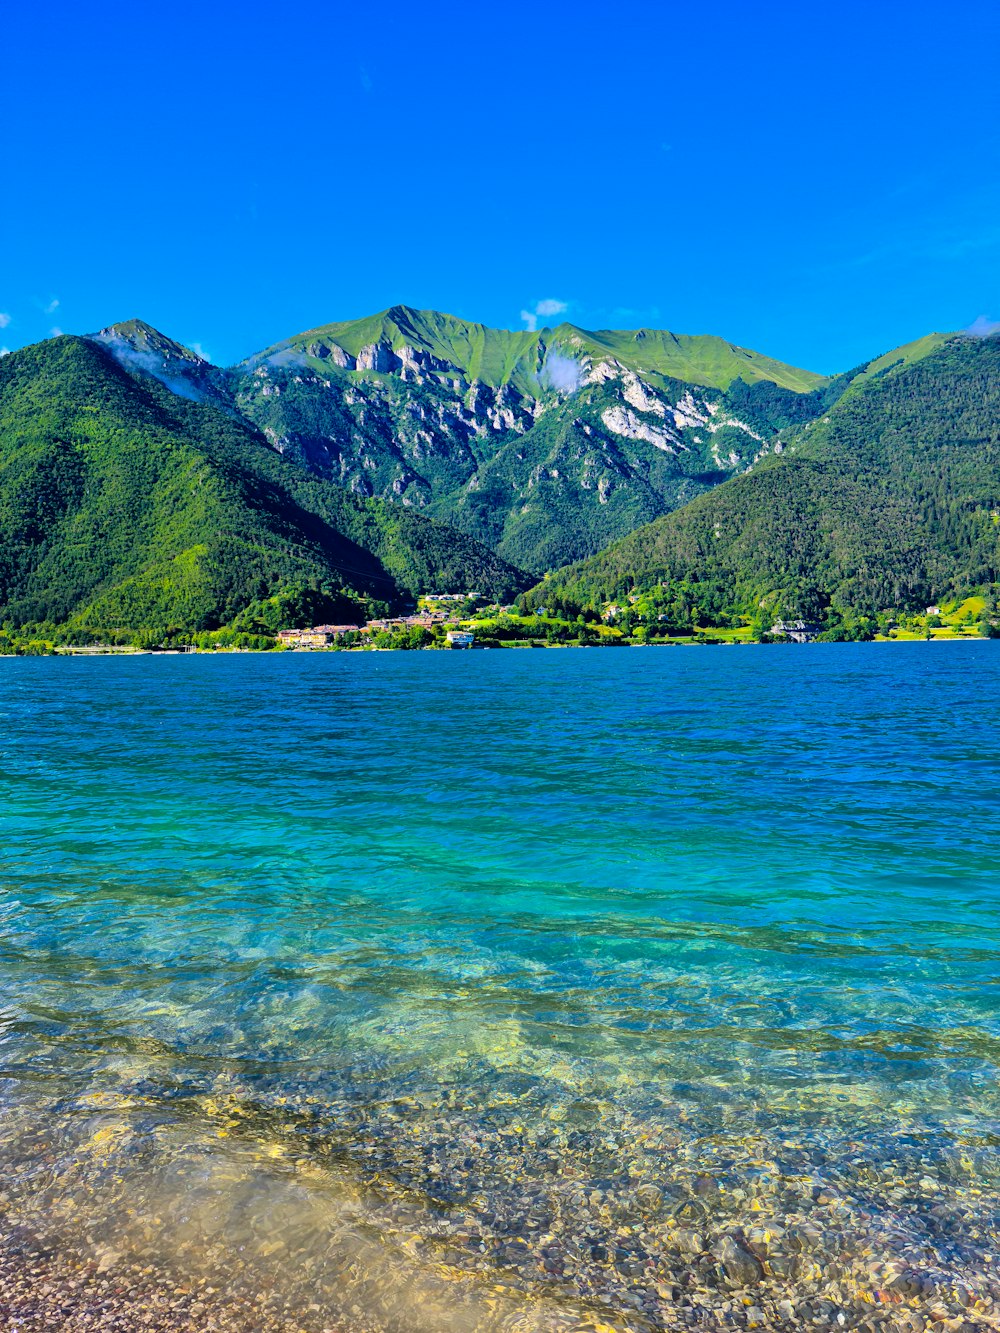 green and brown mountains beside blue sea during daytime